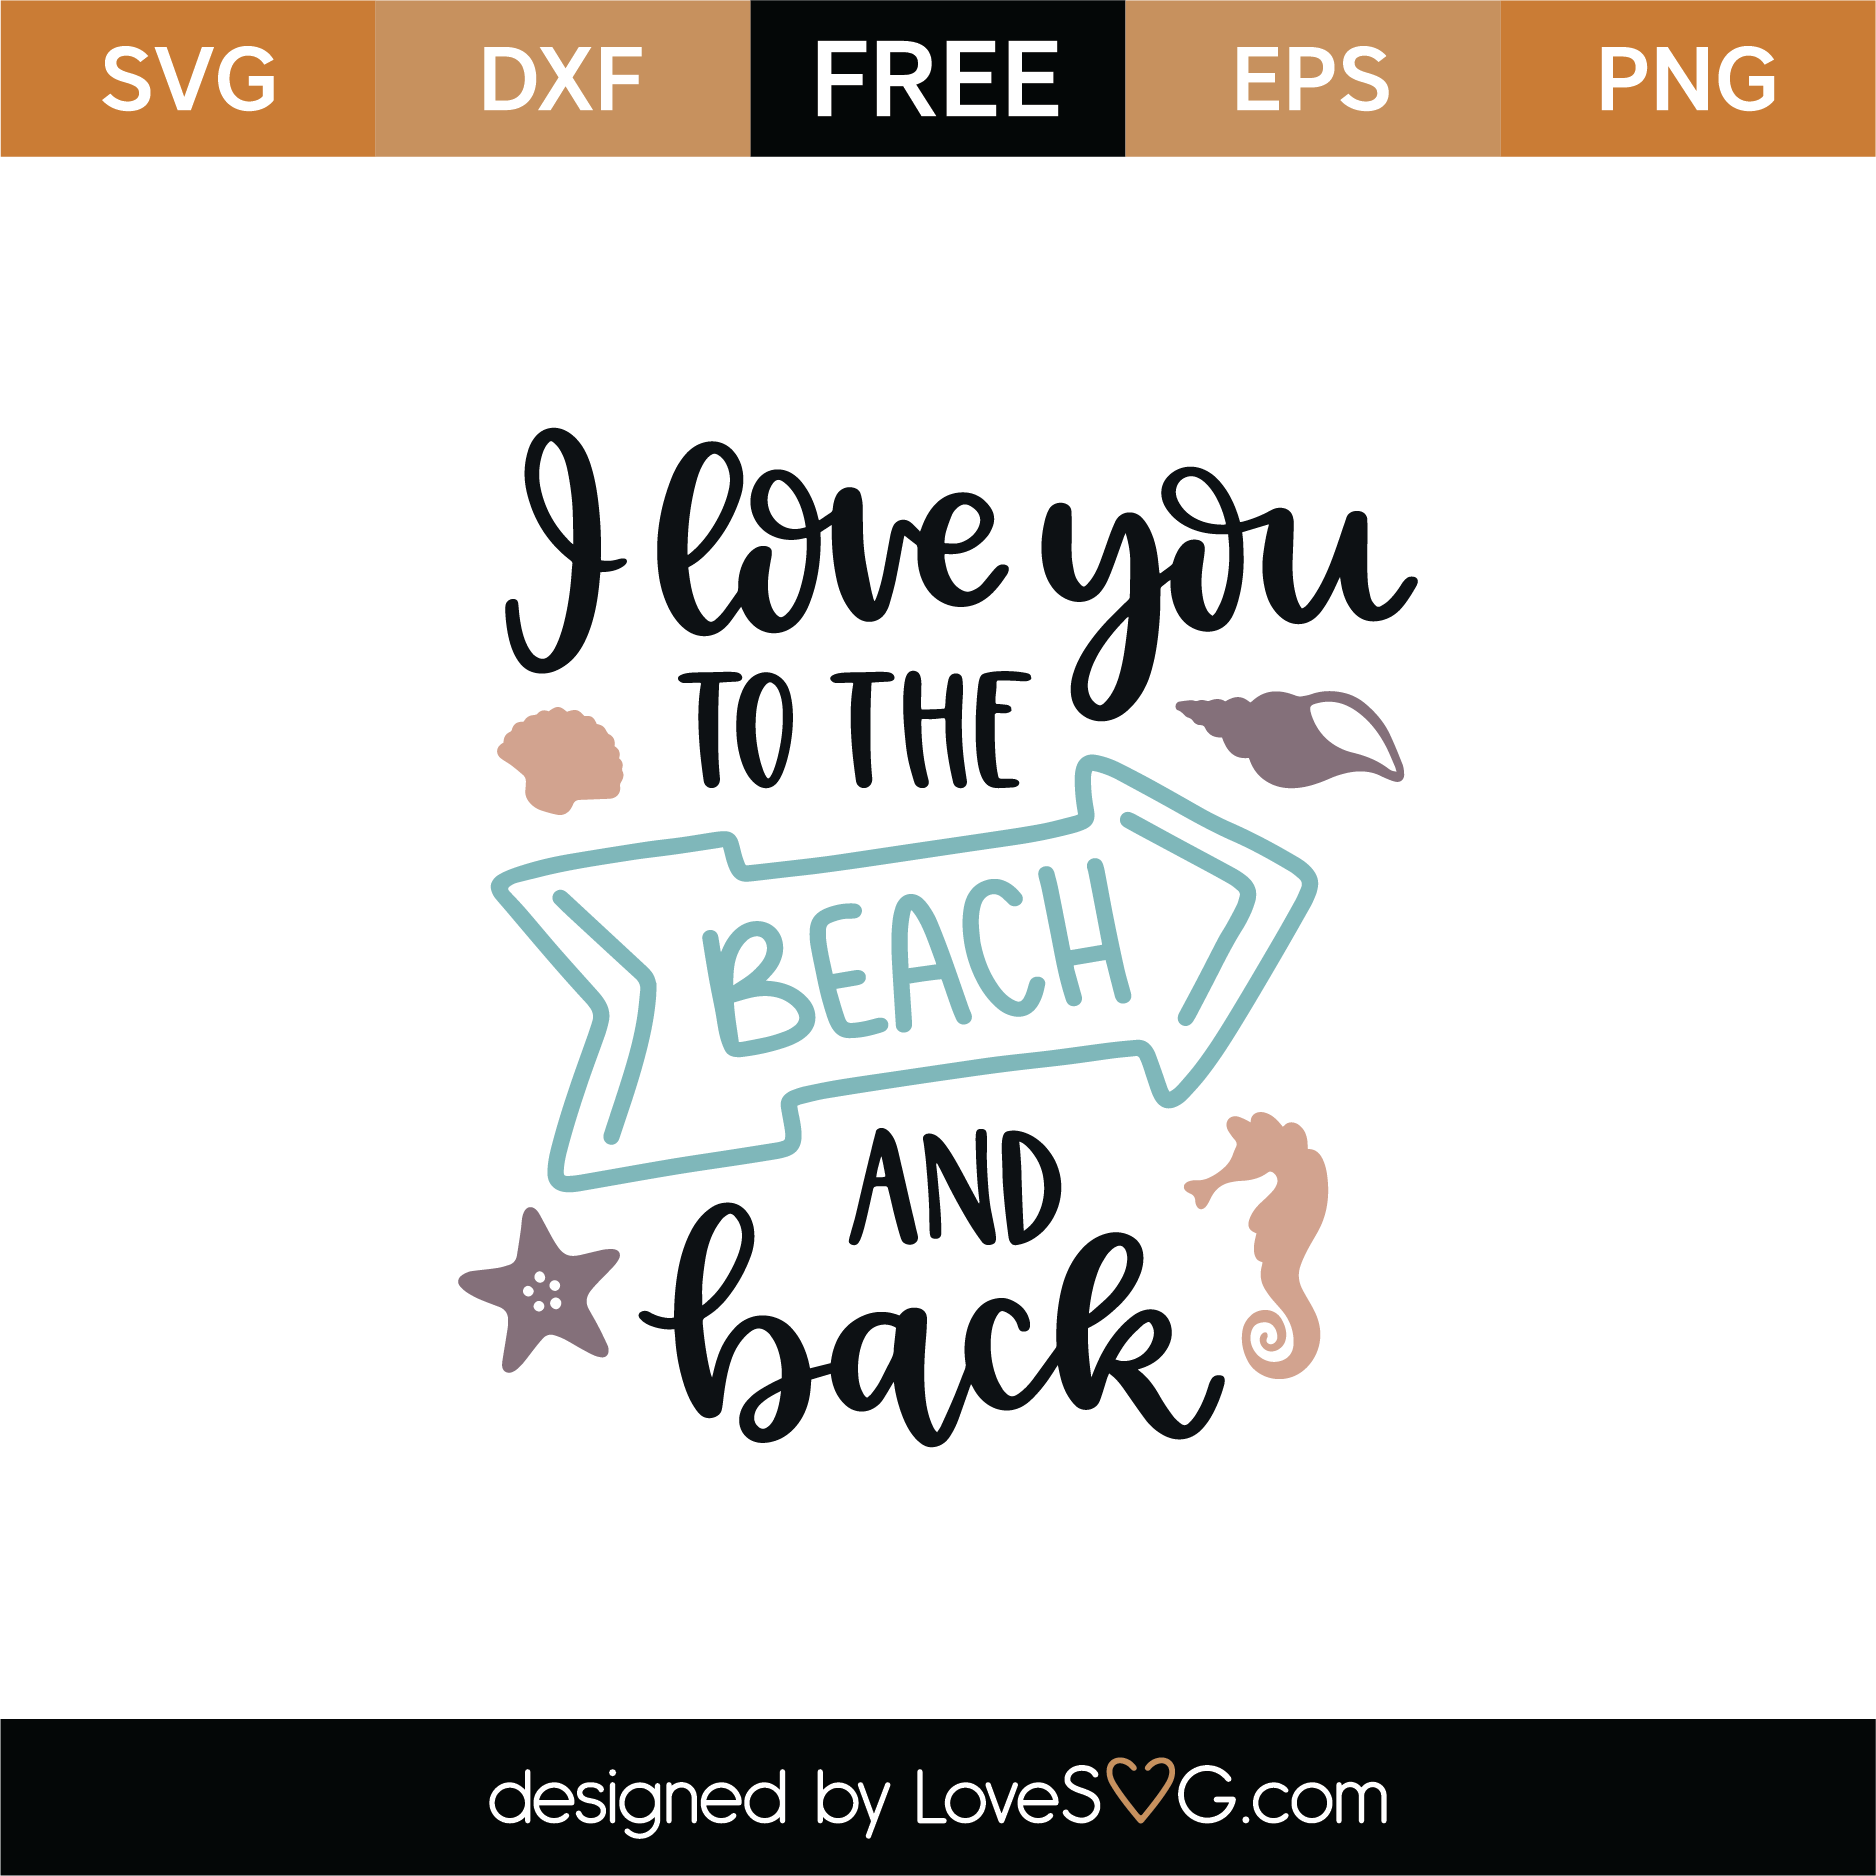 Download Free I Love You To The Beach And Back SVG Cut File | Lovesvg.com